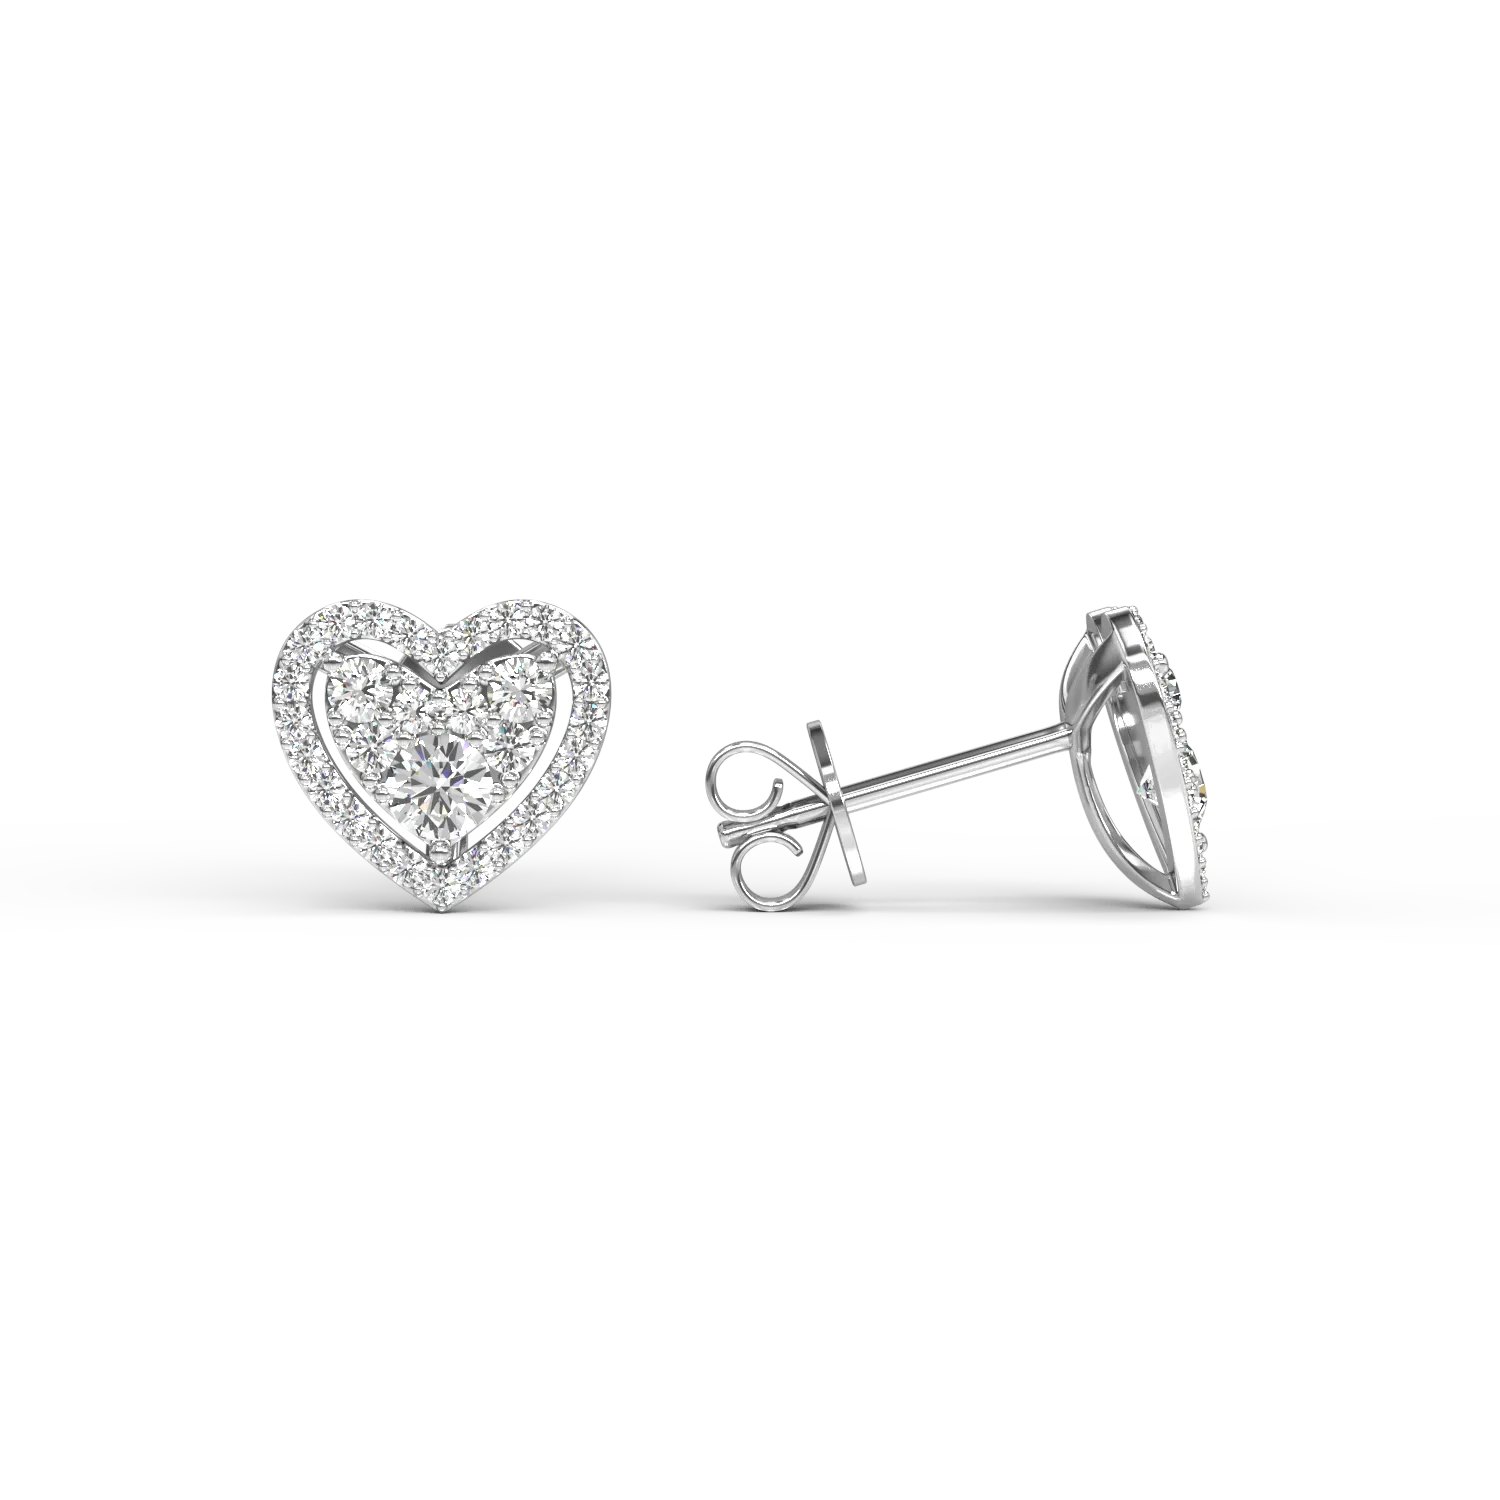 18K white gold heart earrings with 0.5ct diamonds